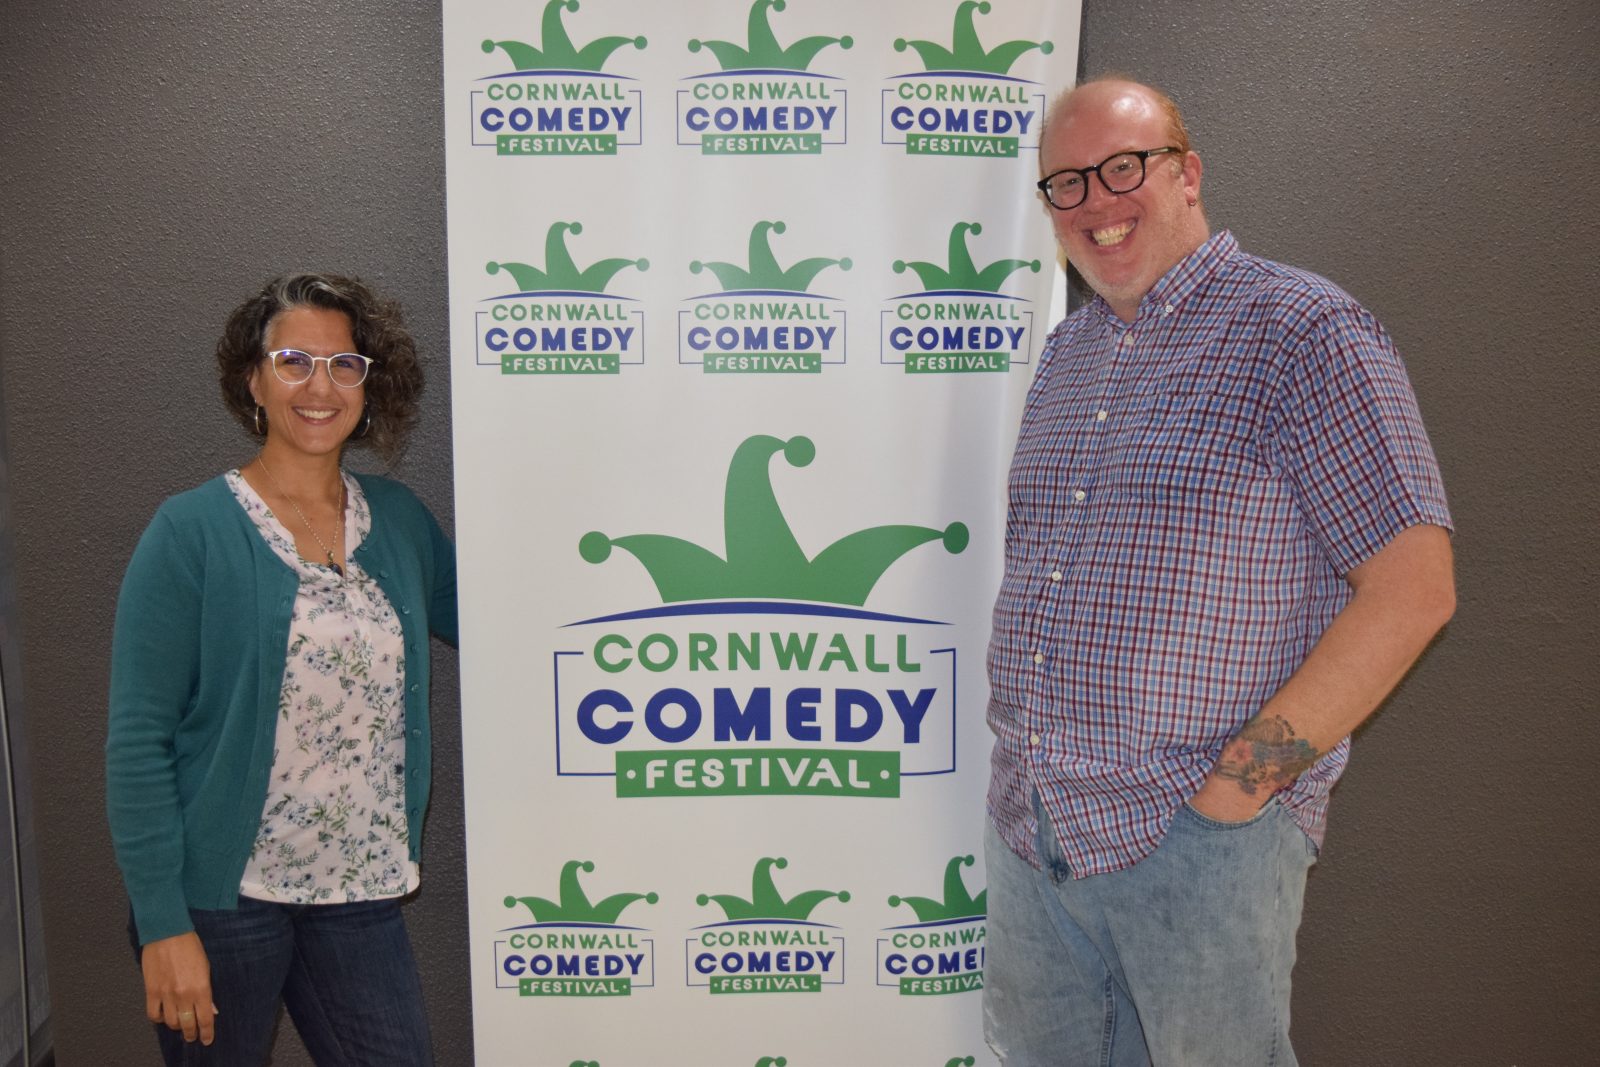 Get some laughs at Cornwall Comedy Fest